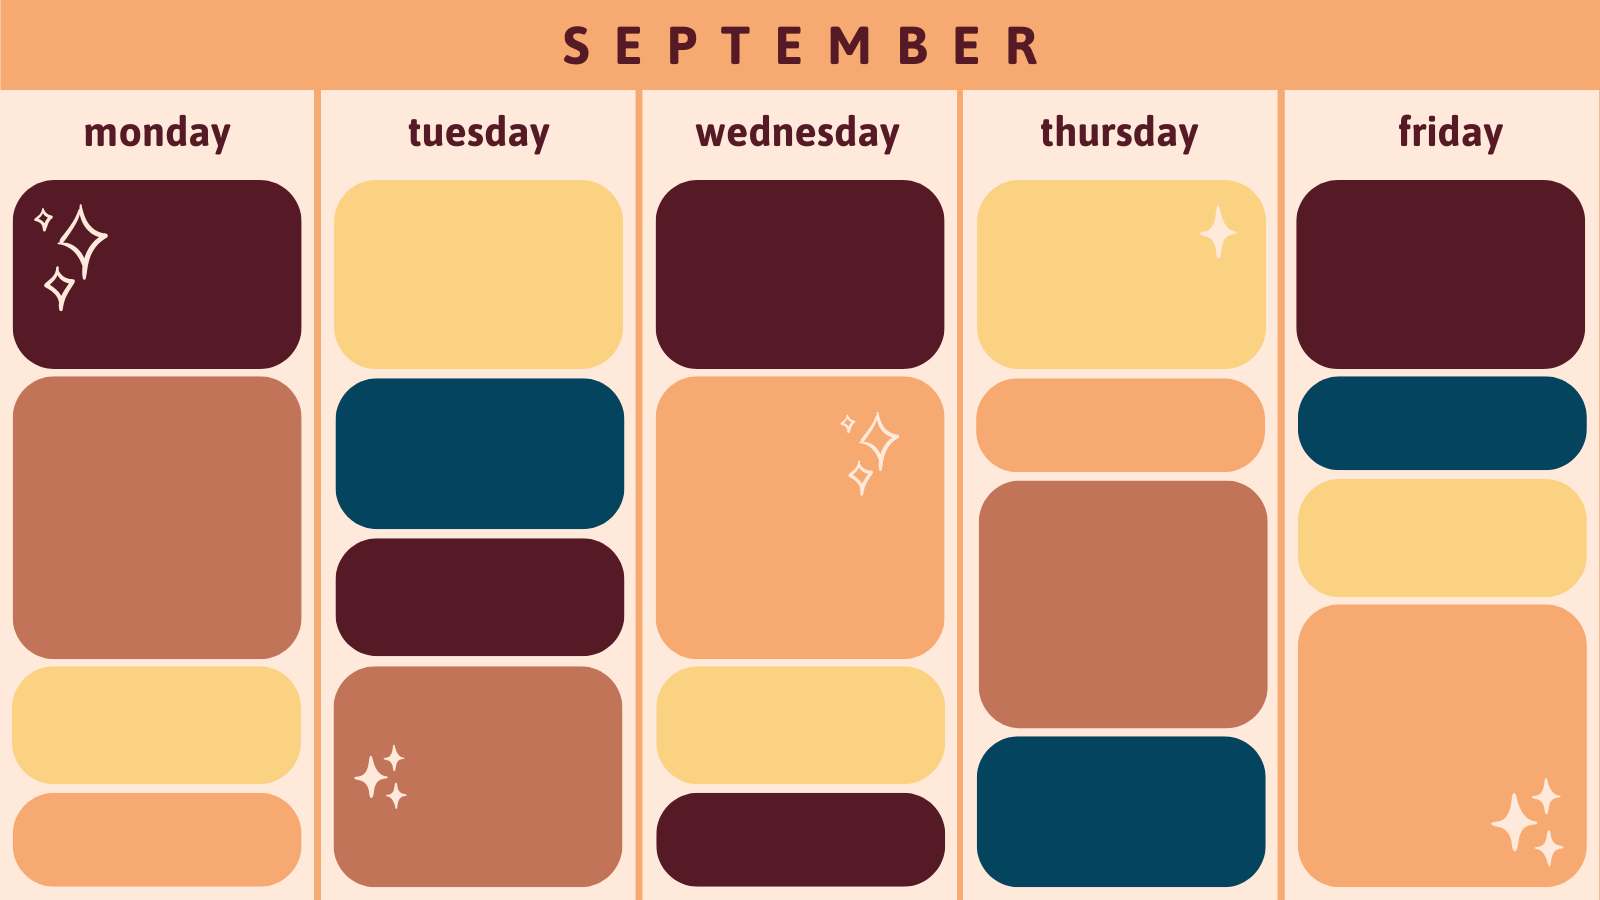 A calendar listing "September" at the top. The days Monday, Tuesday, Wednesday, Thursday and Friday are displayed consecutively at the top of five columns. In each column, there are different colored blocks.